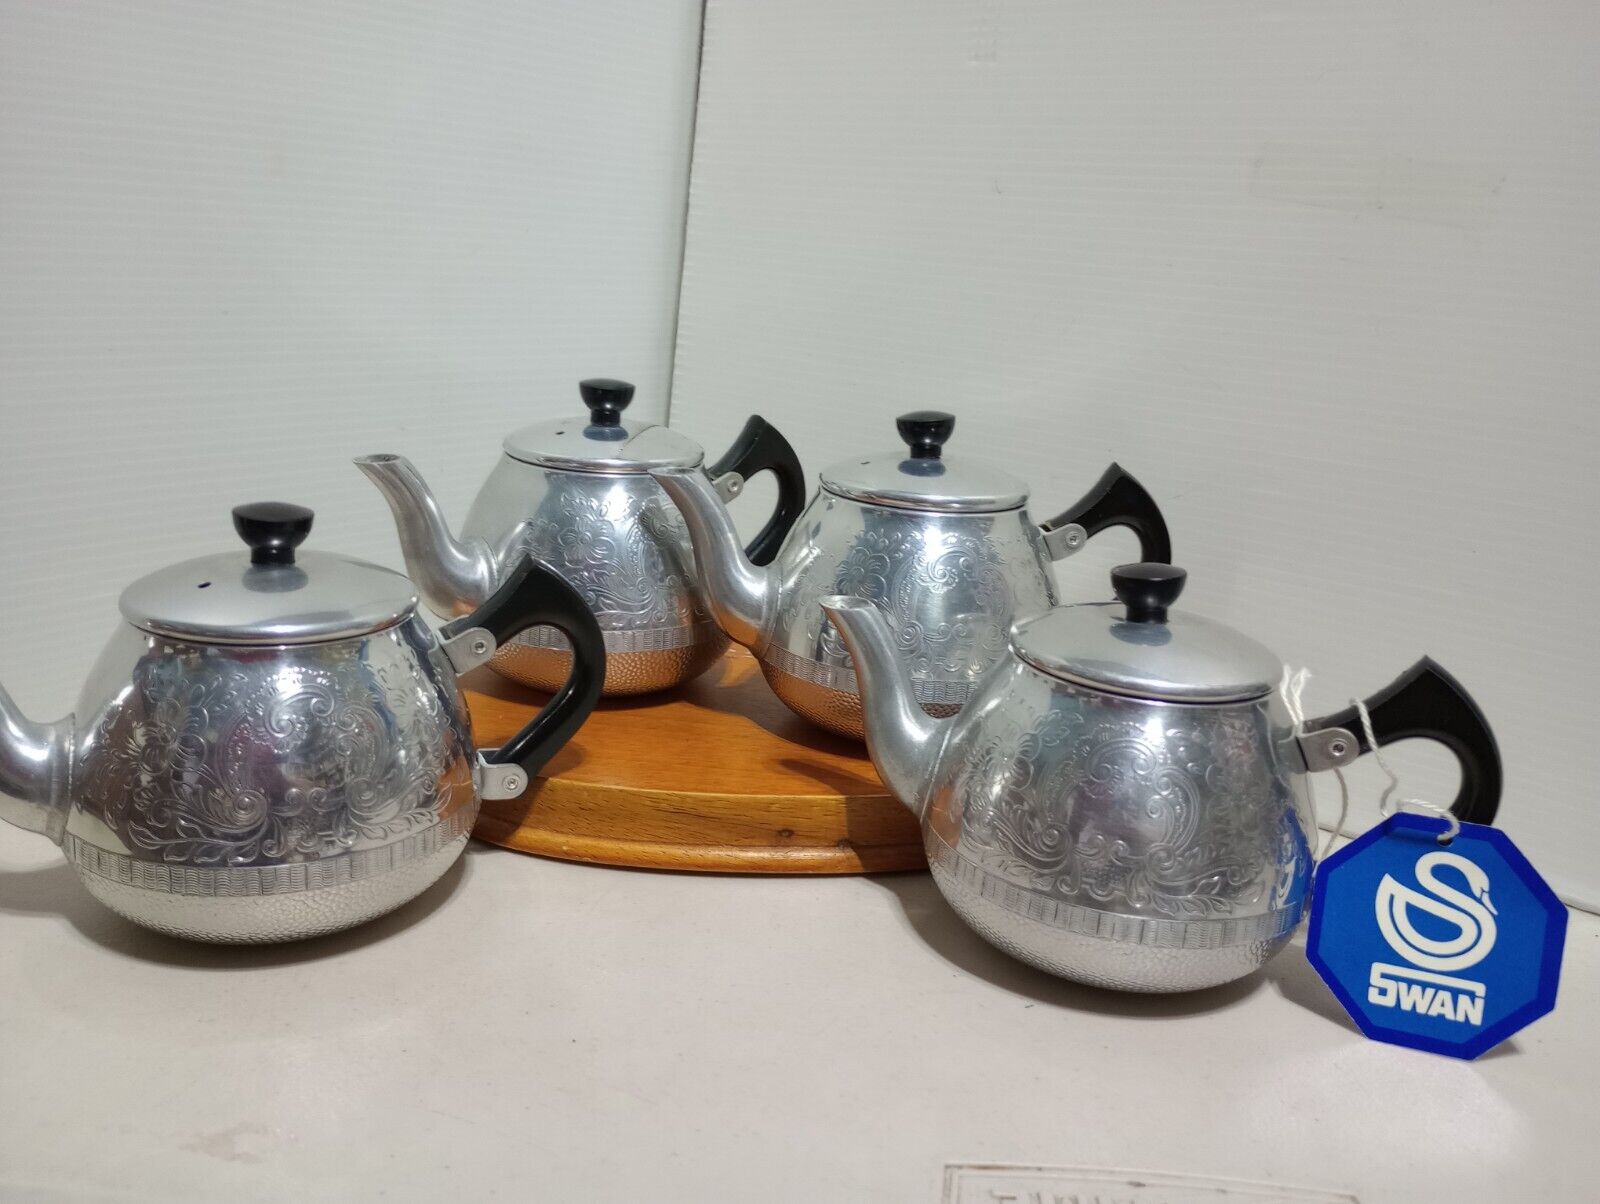 Vintage Swan Carlton Small Tea Pots X 4 Two New, Two Used One Cup Size